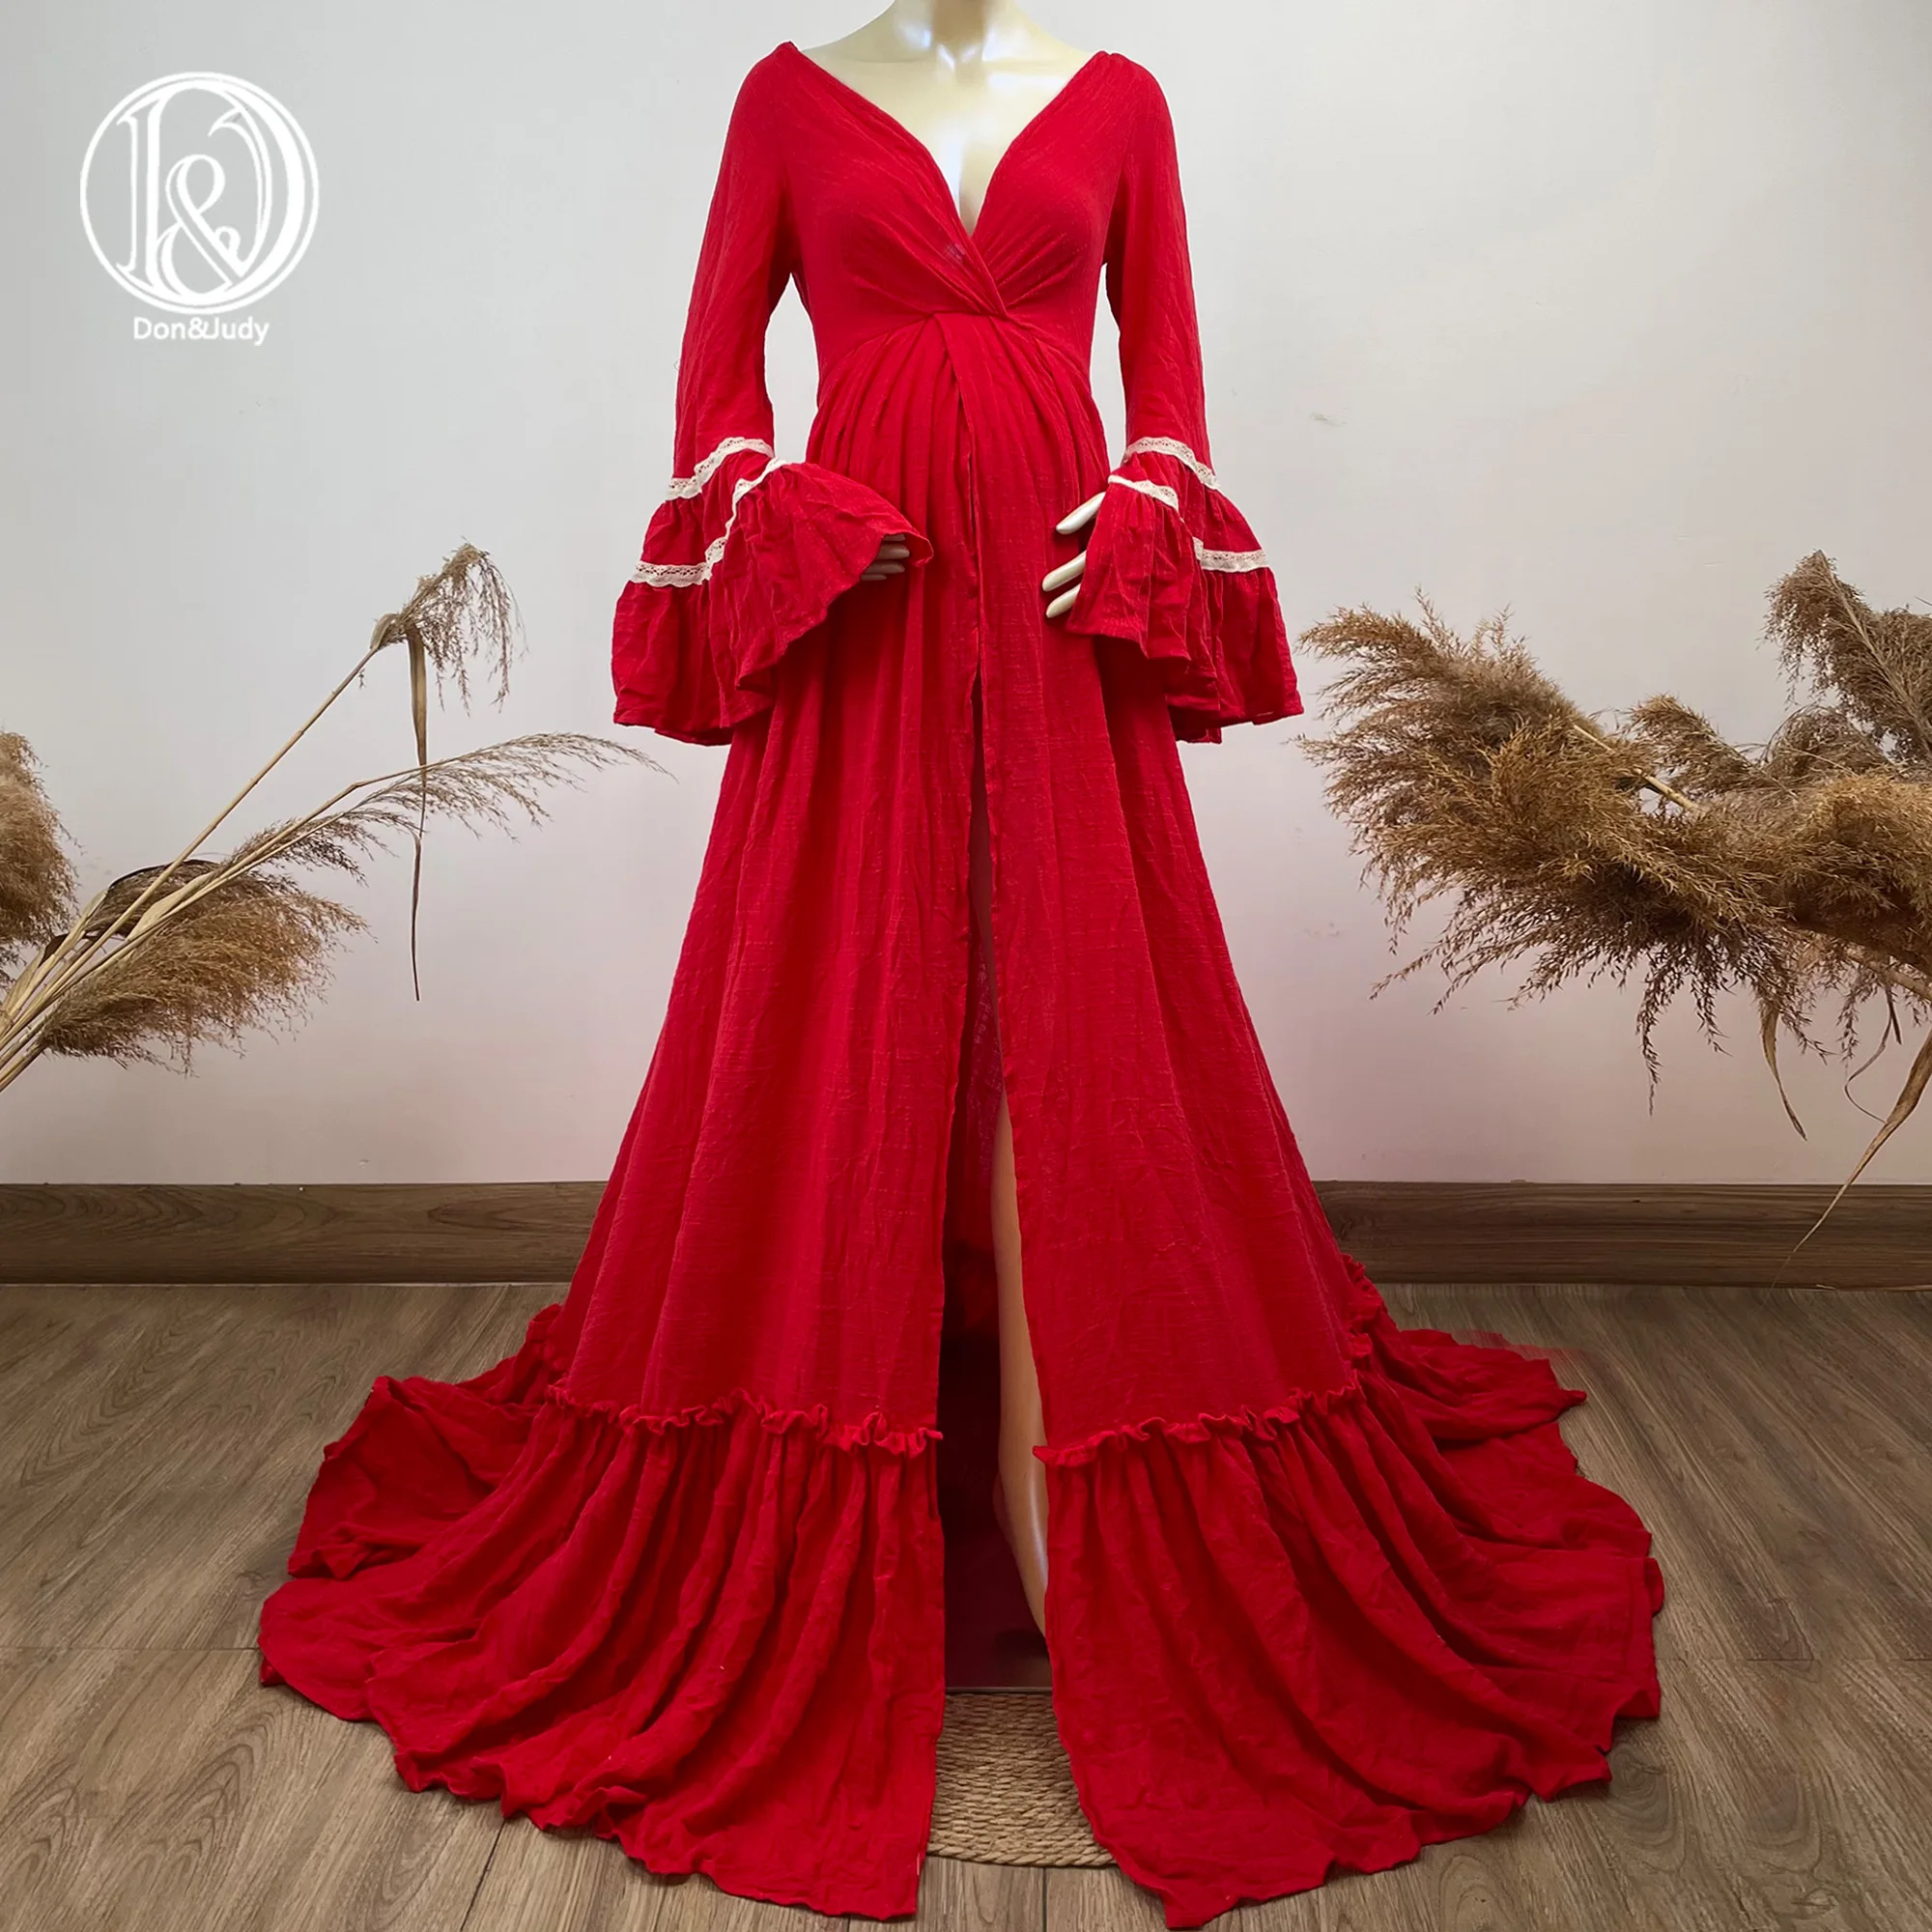 Don&Judy Red Flare Sleeves Christmas Maternity Or Non Maternity Dress for Photoshoot Pregnancy Photography Prop Party Gown 2022